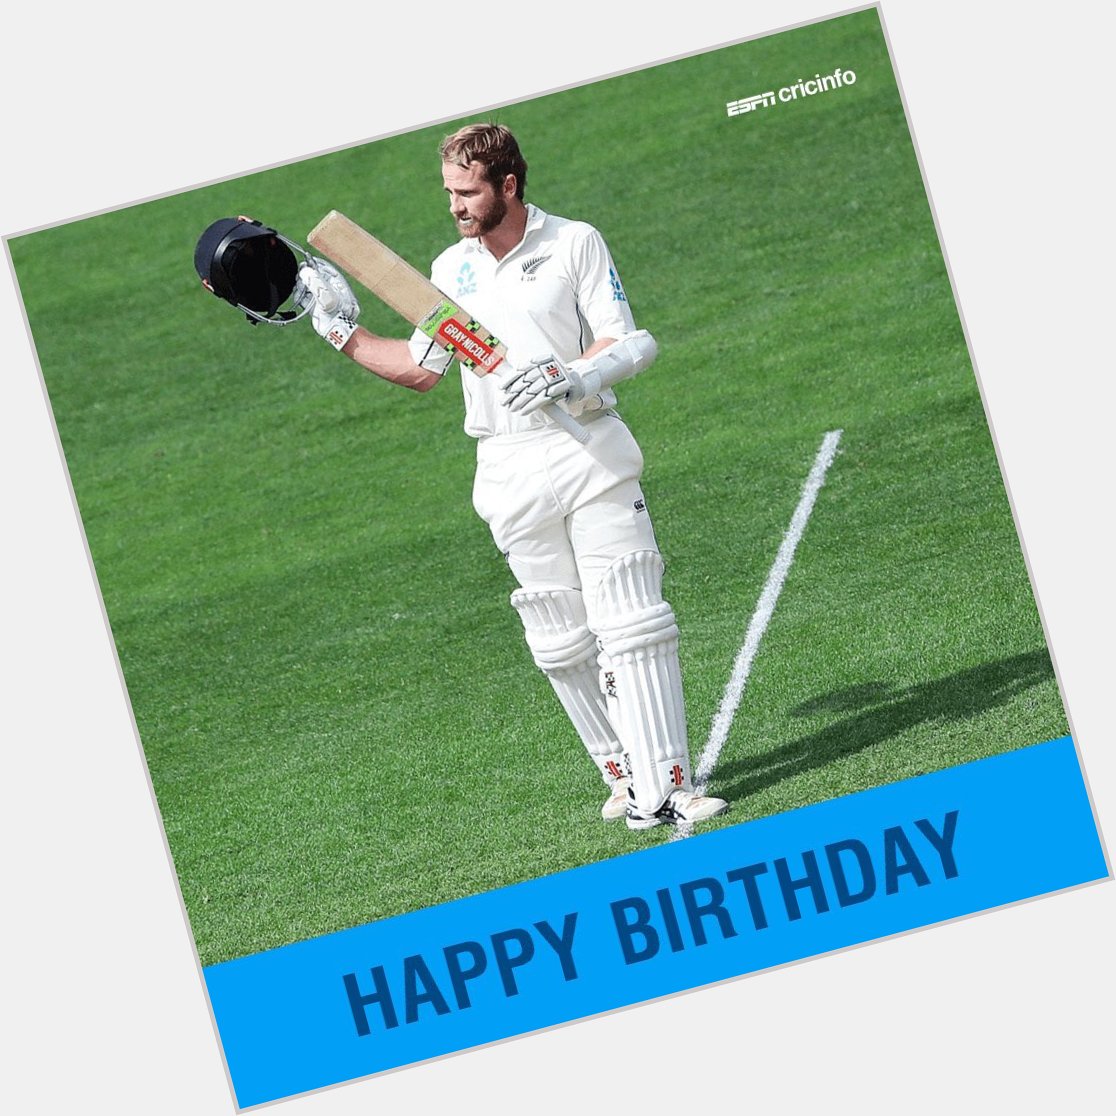 Happy birthday Kane Williamson. one of favorite cricketer of all times. 